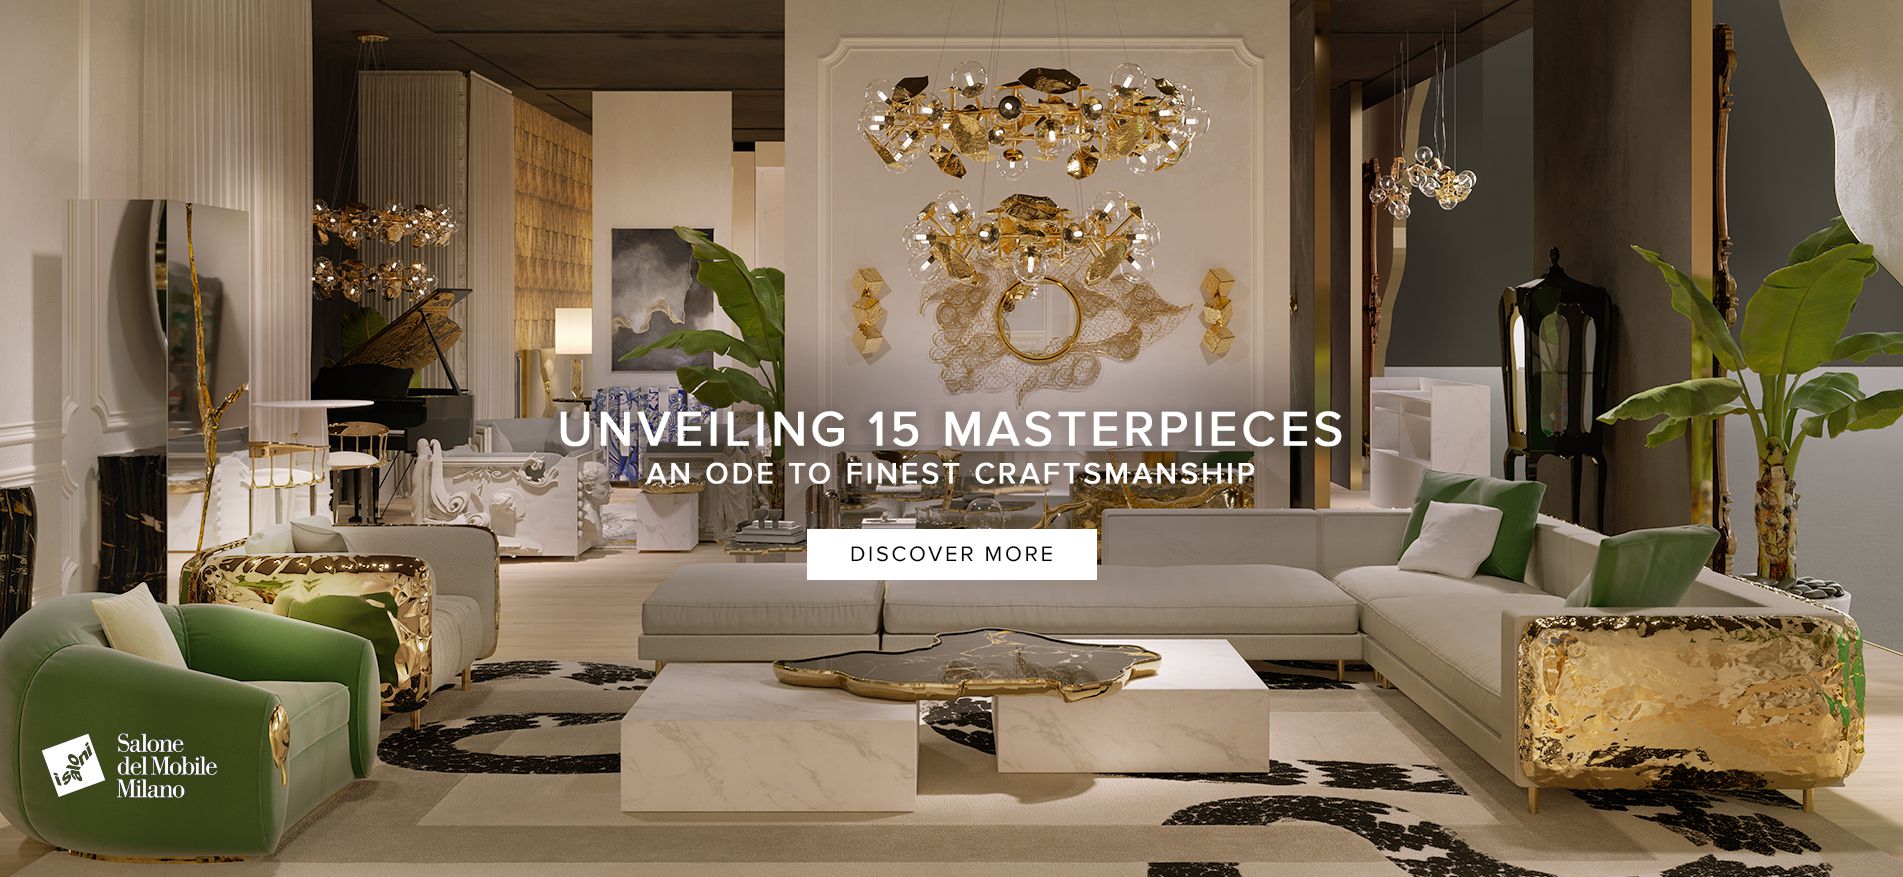 Unveiling 15 Masterpieces - An Ode to Finest Crafstmanship - Salone del Mobile Milano 2022 - Boca do Lobo